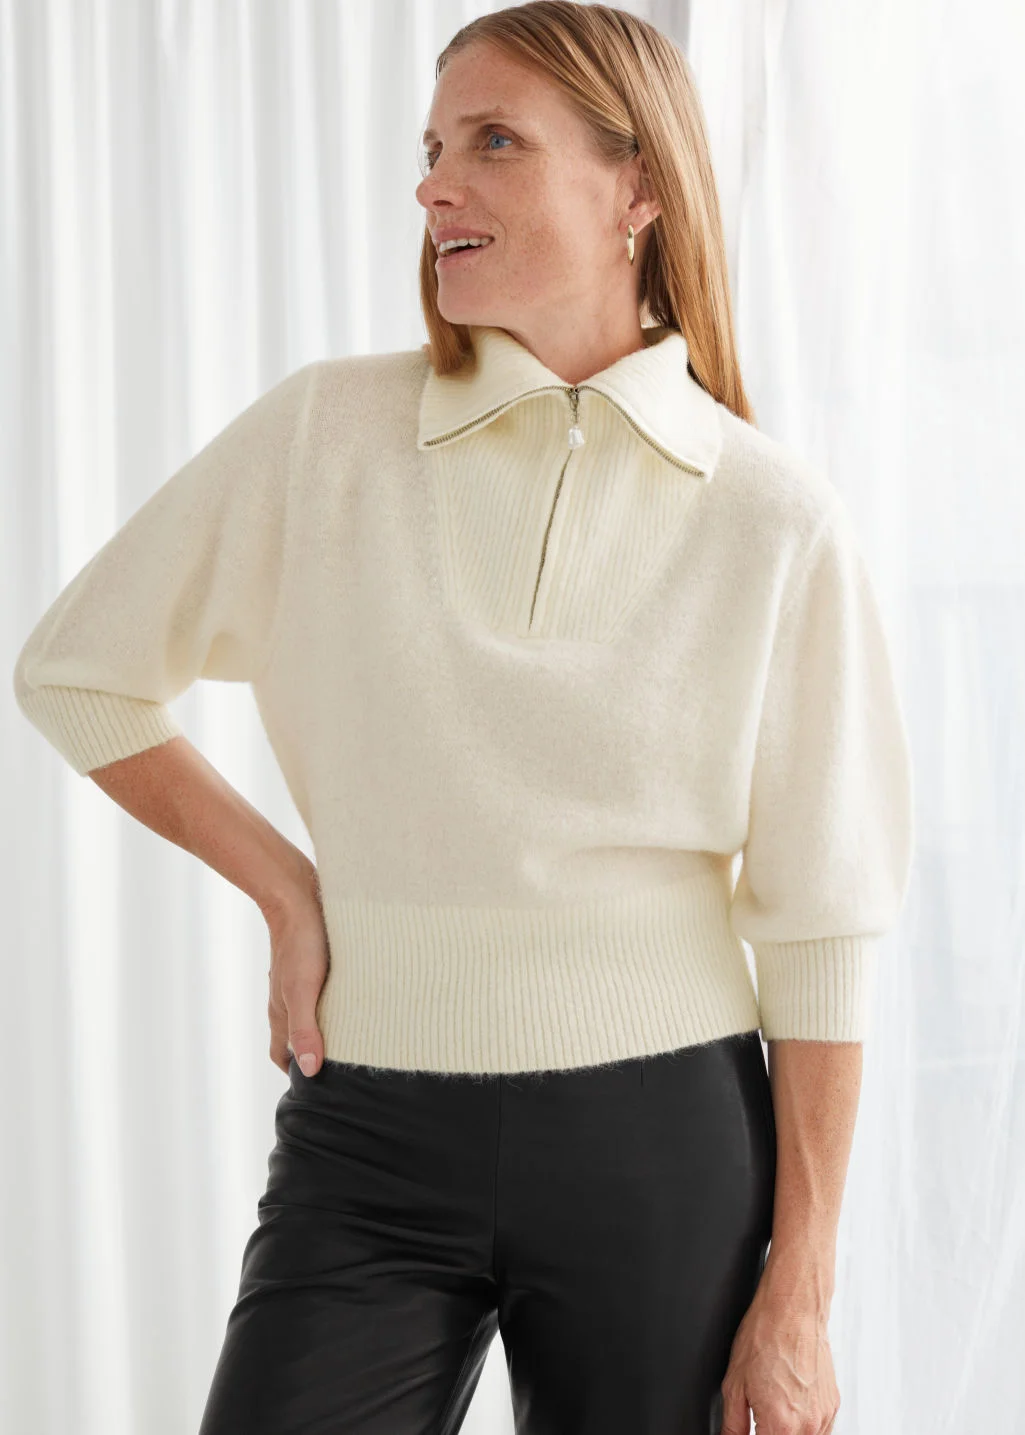 & Other Stories + Fuzzy Zip Collar Knit Top